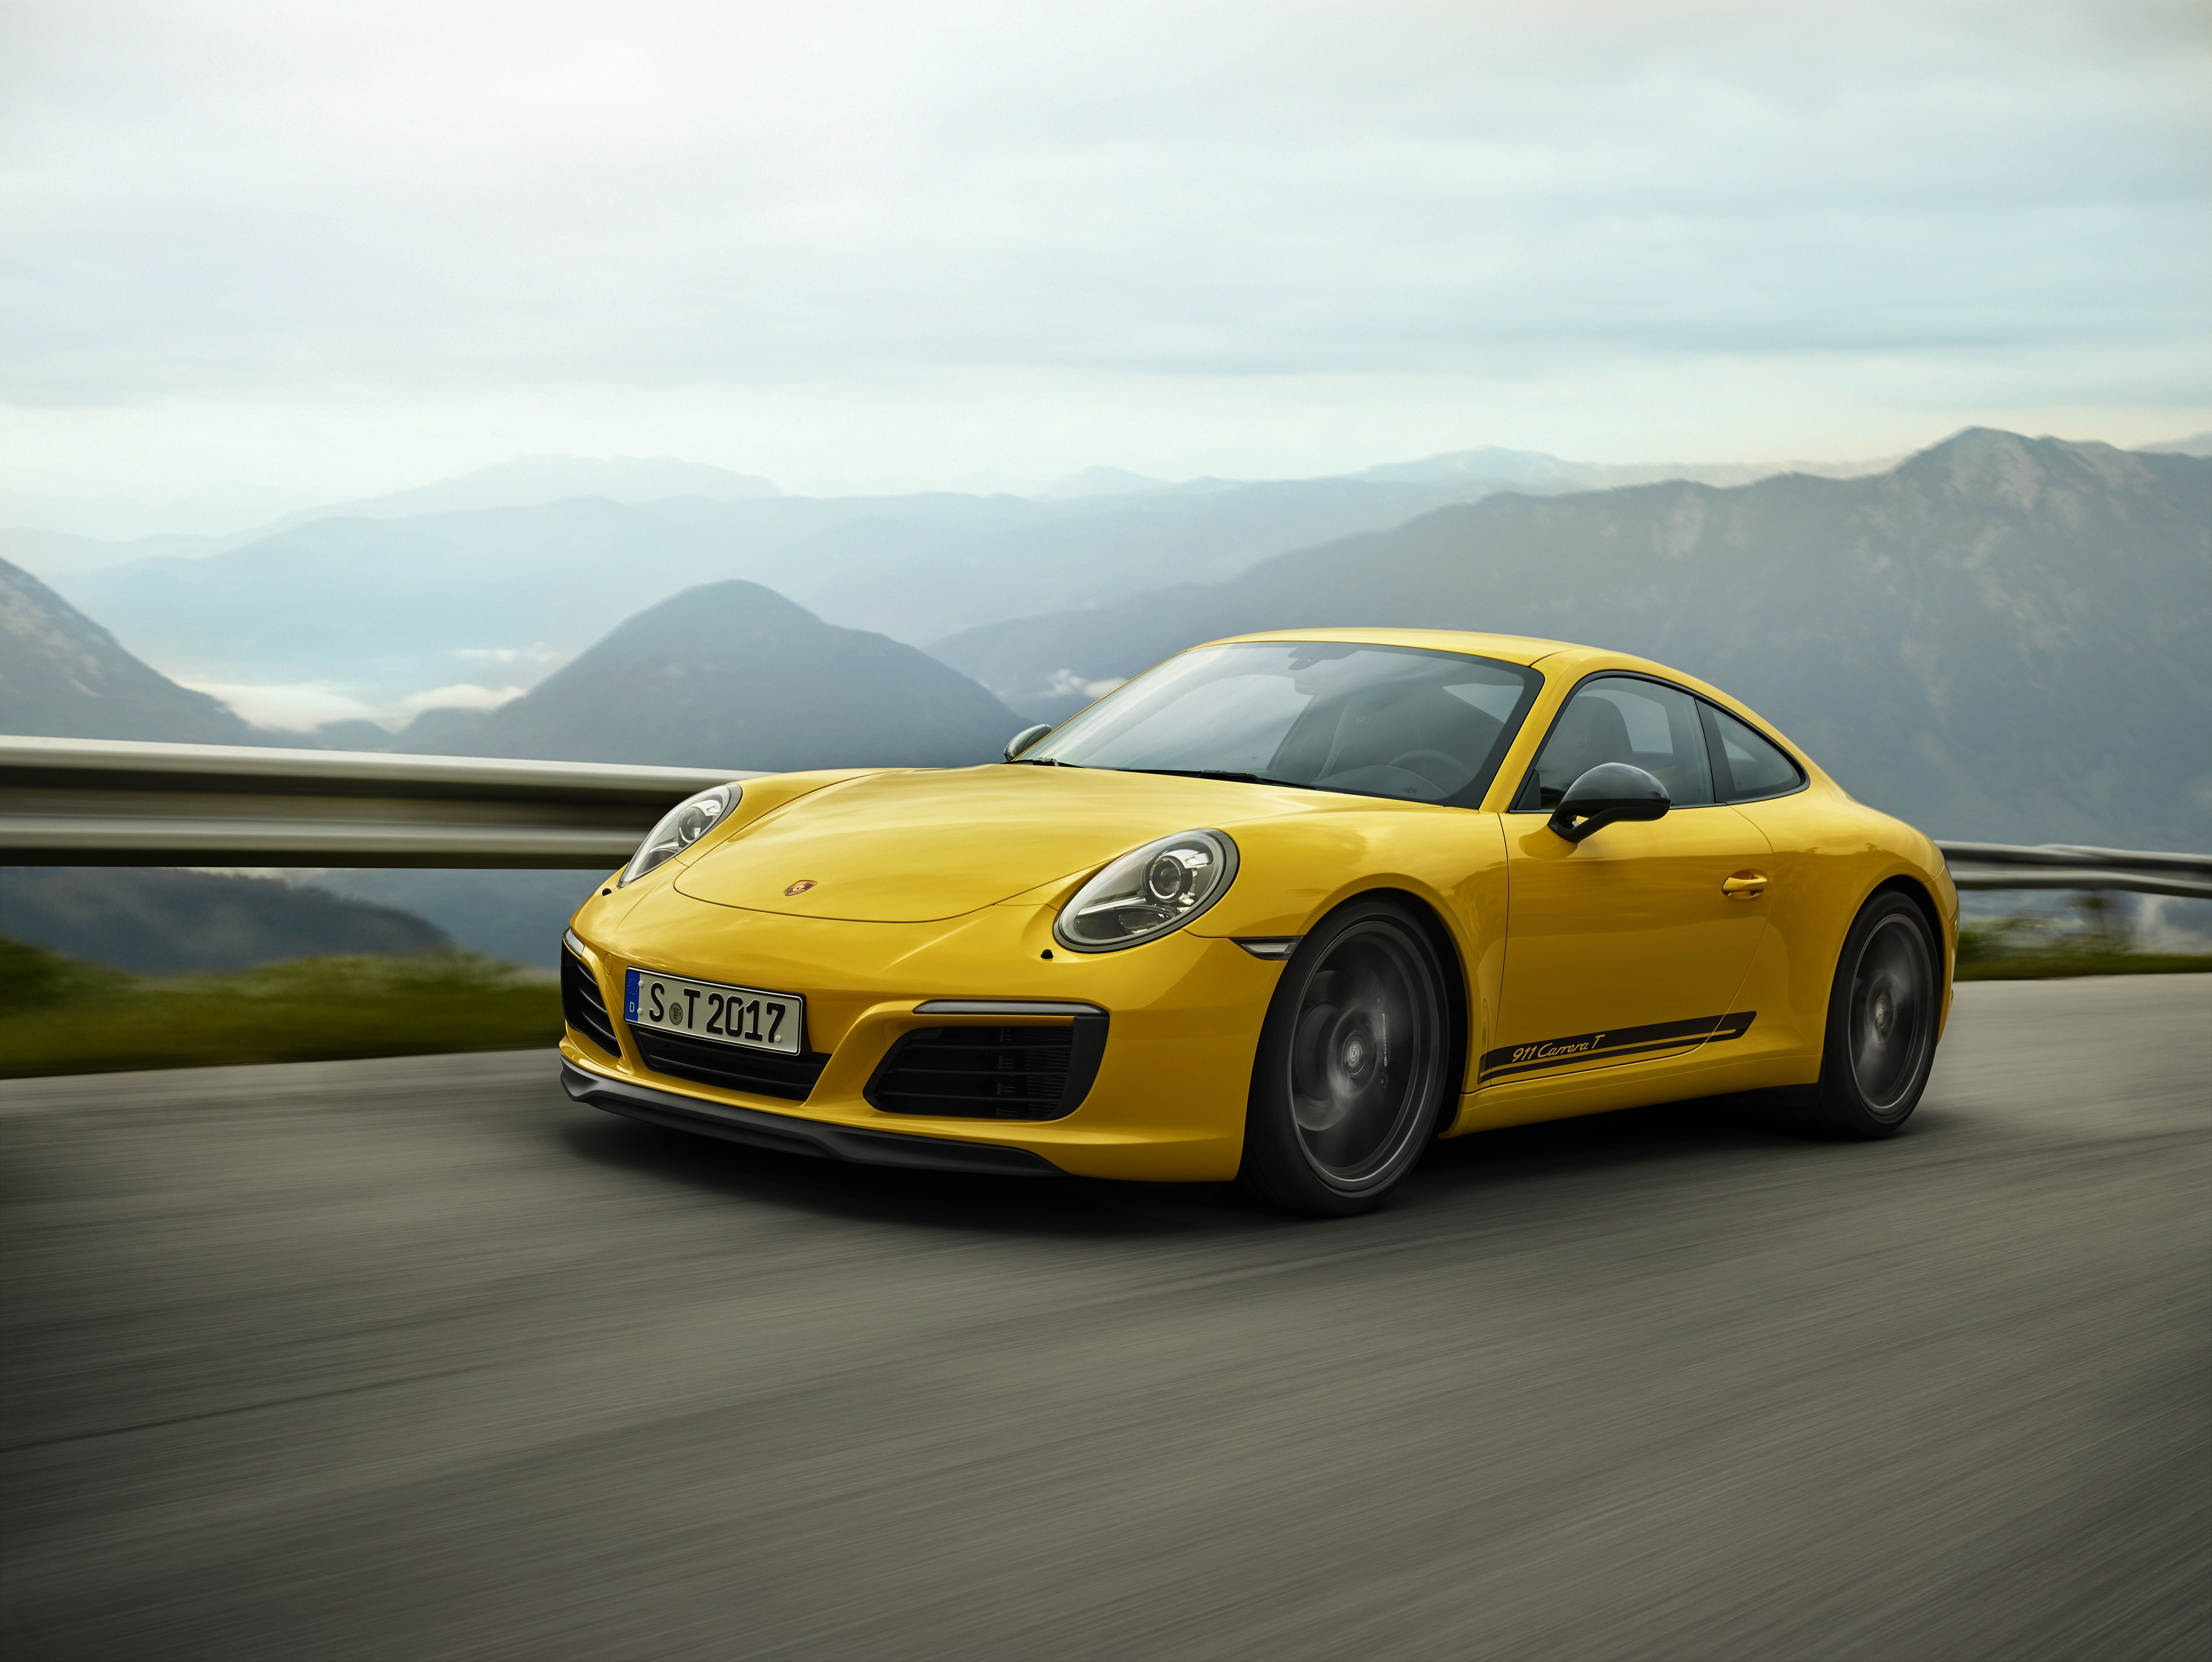 Free photo Porsche 911 carrera t yellow driving on a country road